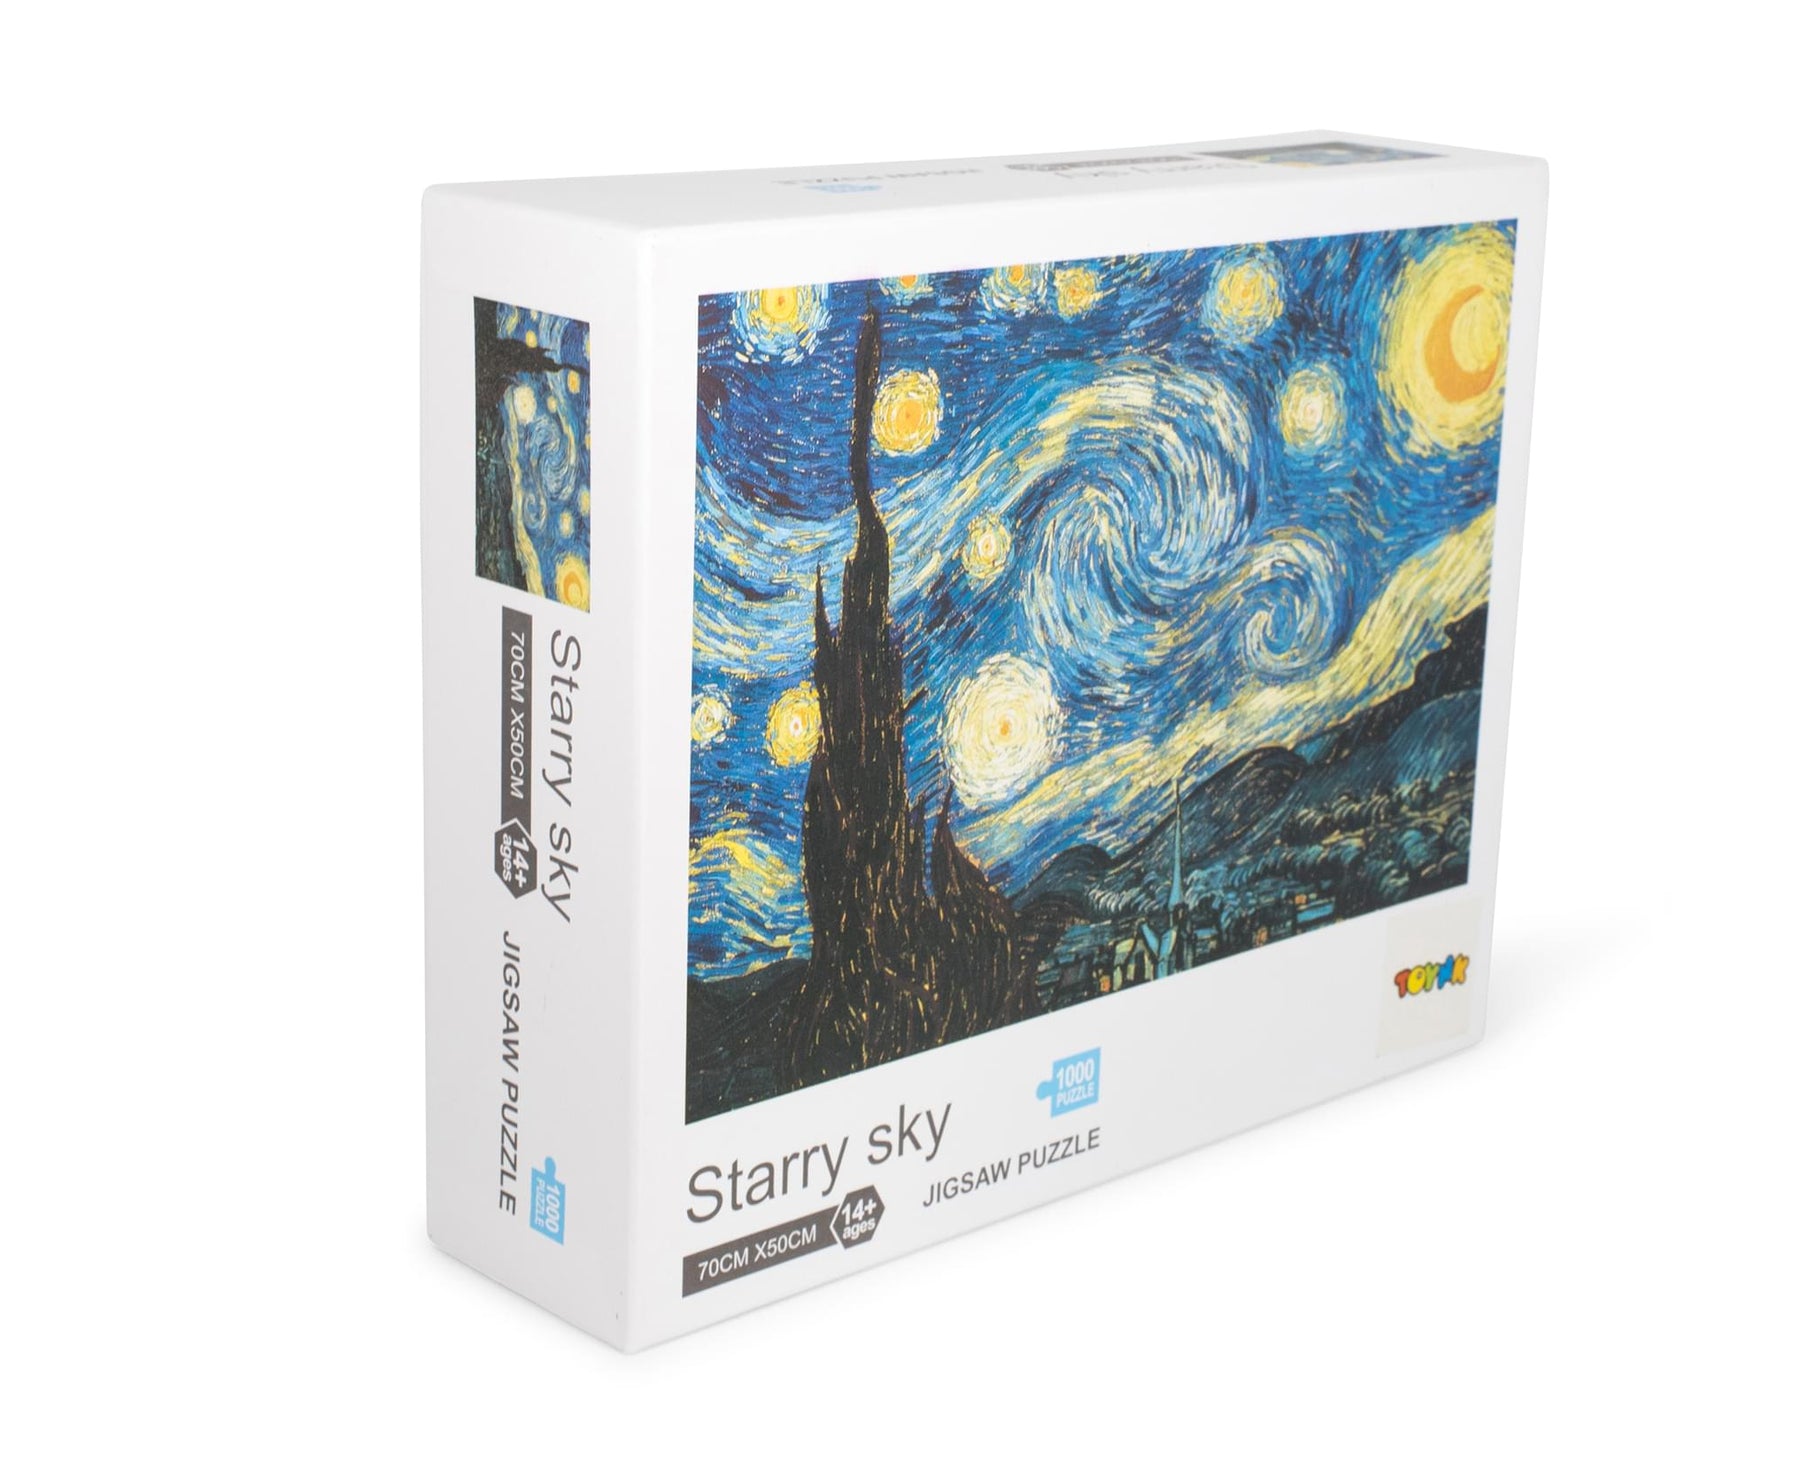 Starry Sky 1000-Piece Jigsaw Puzzle | Starry Night Puzzle 1000 | Van Gogh Puzzle